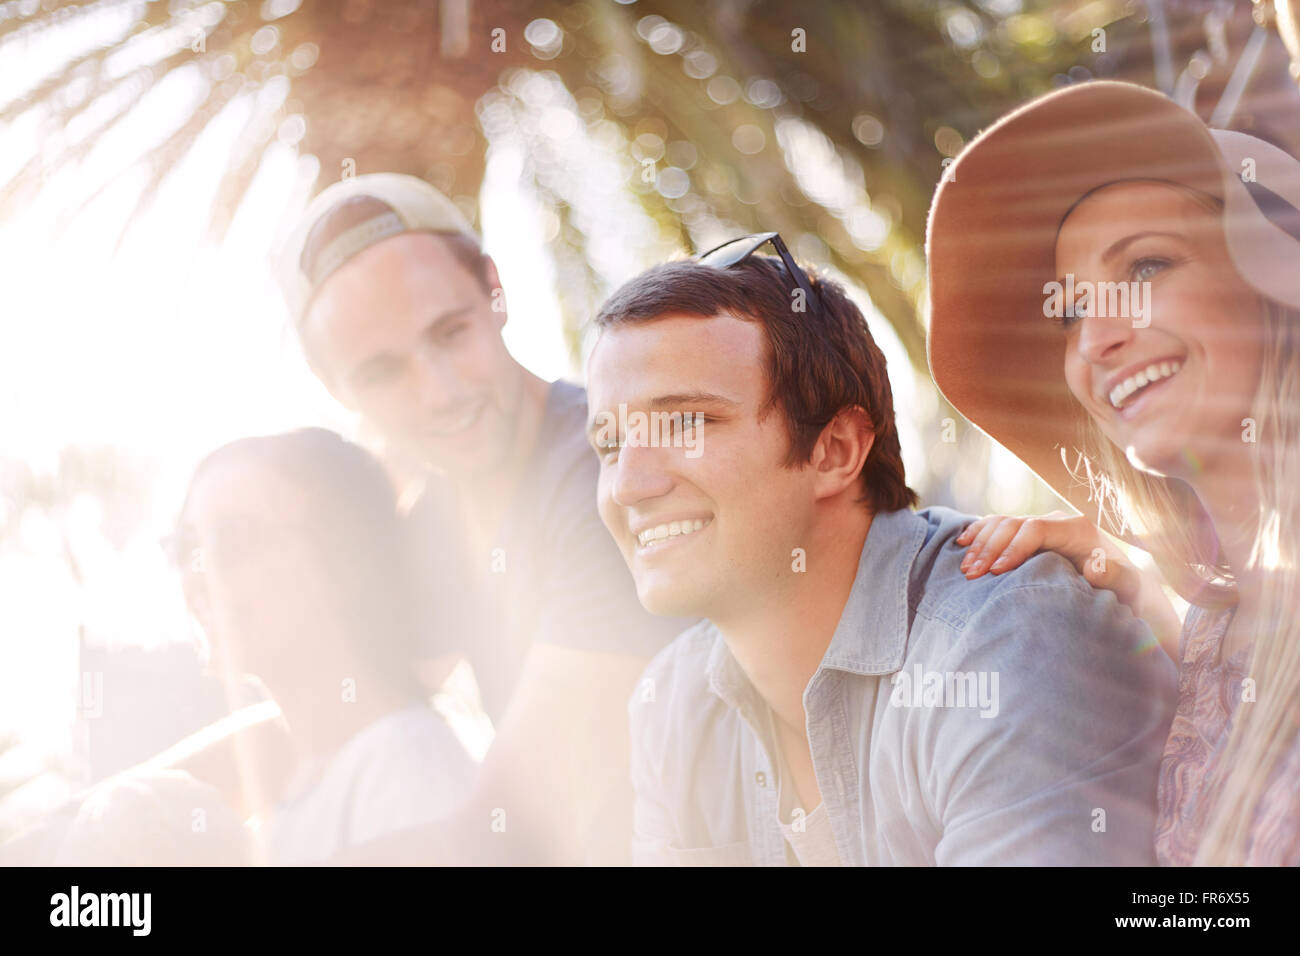 Friends smiling summer outdoors Stock Photo